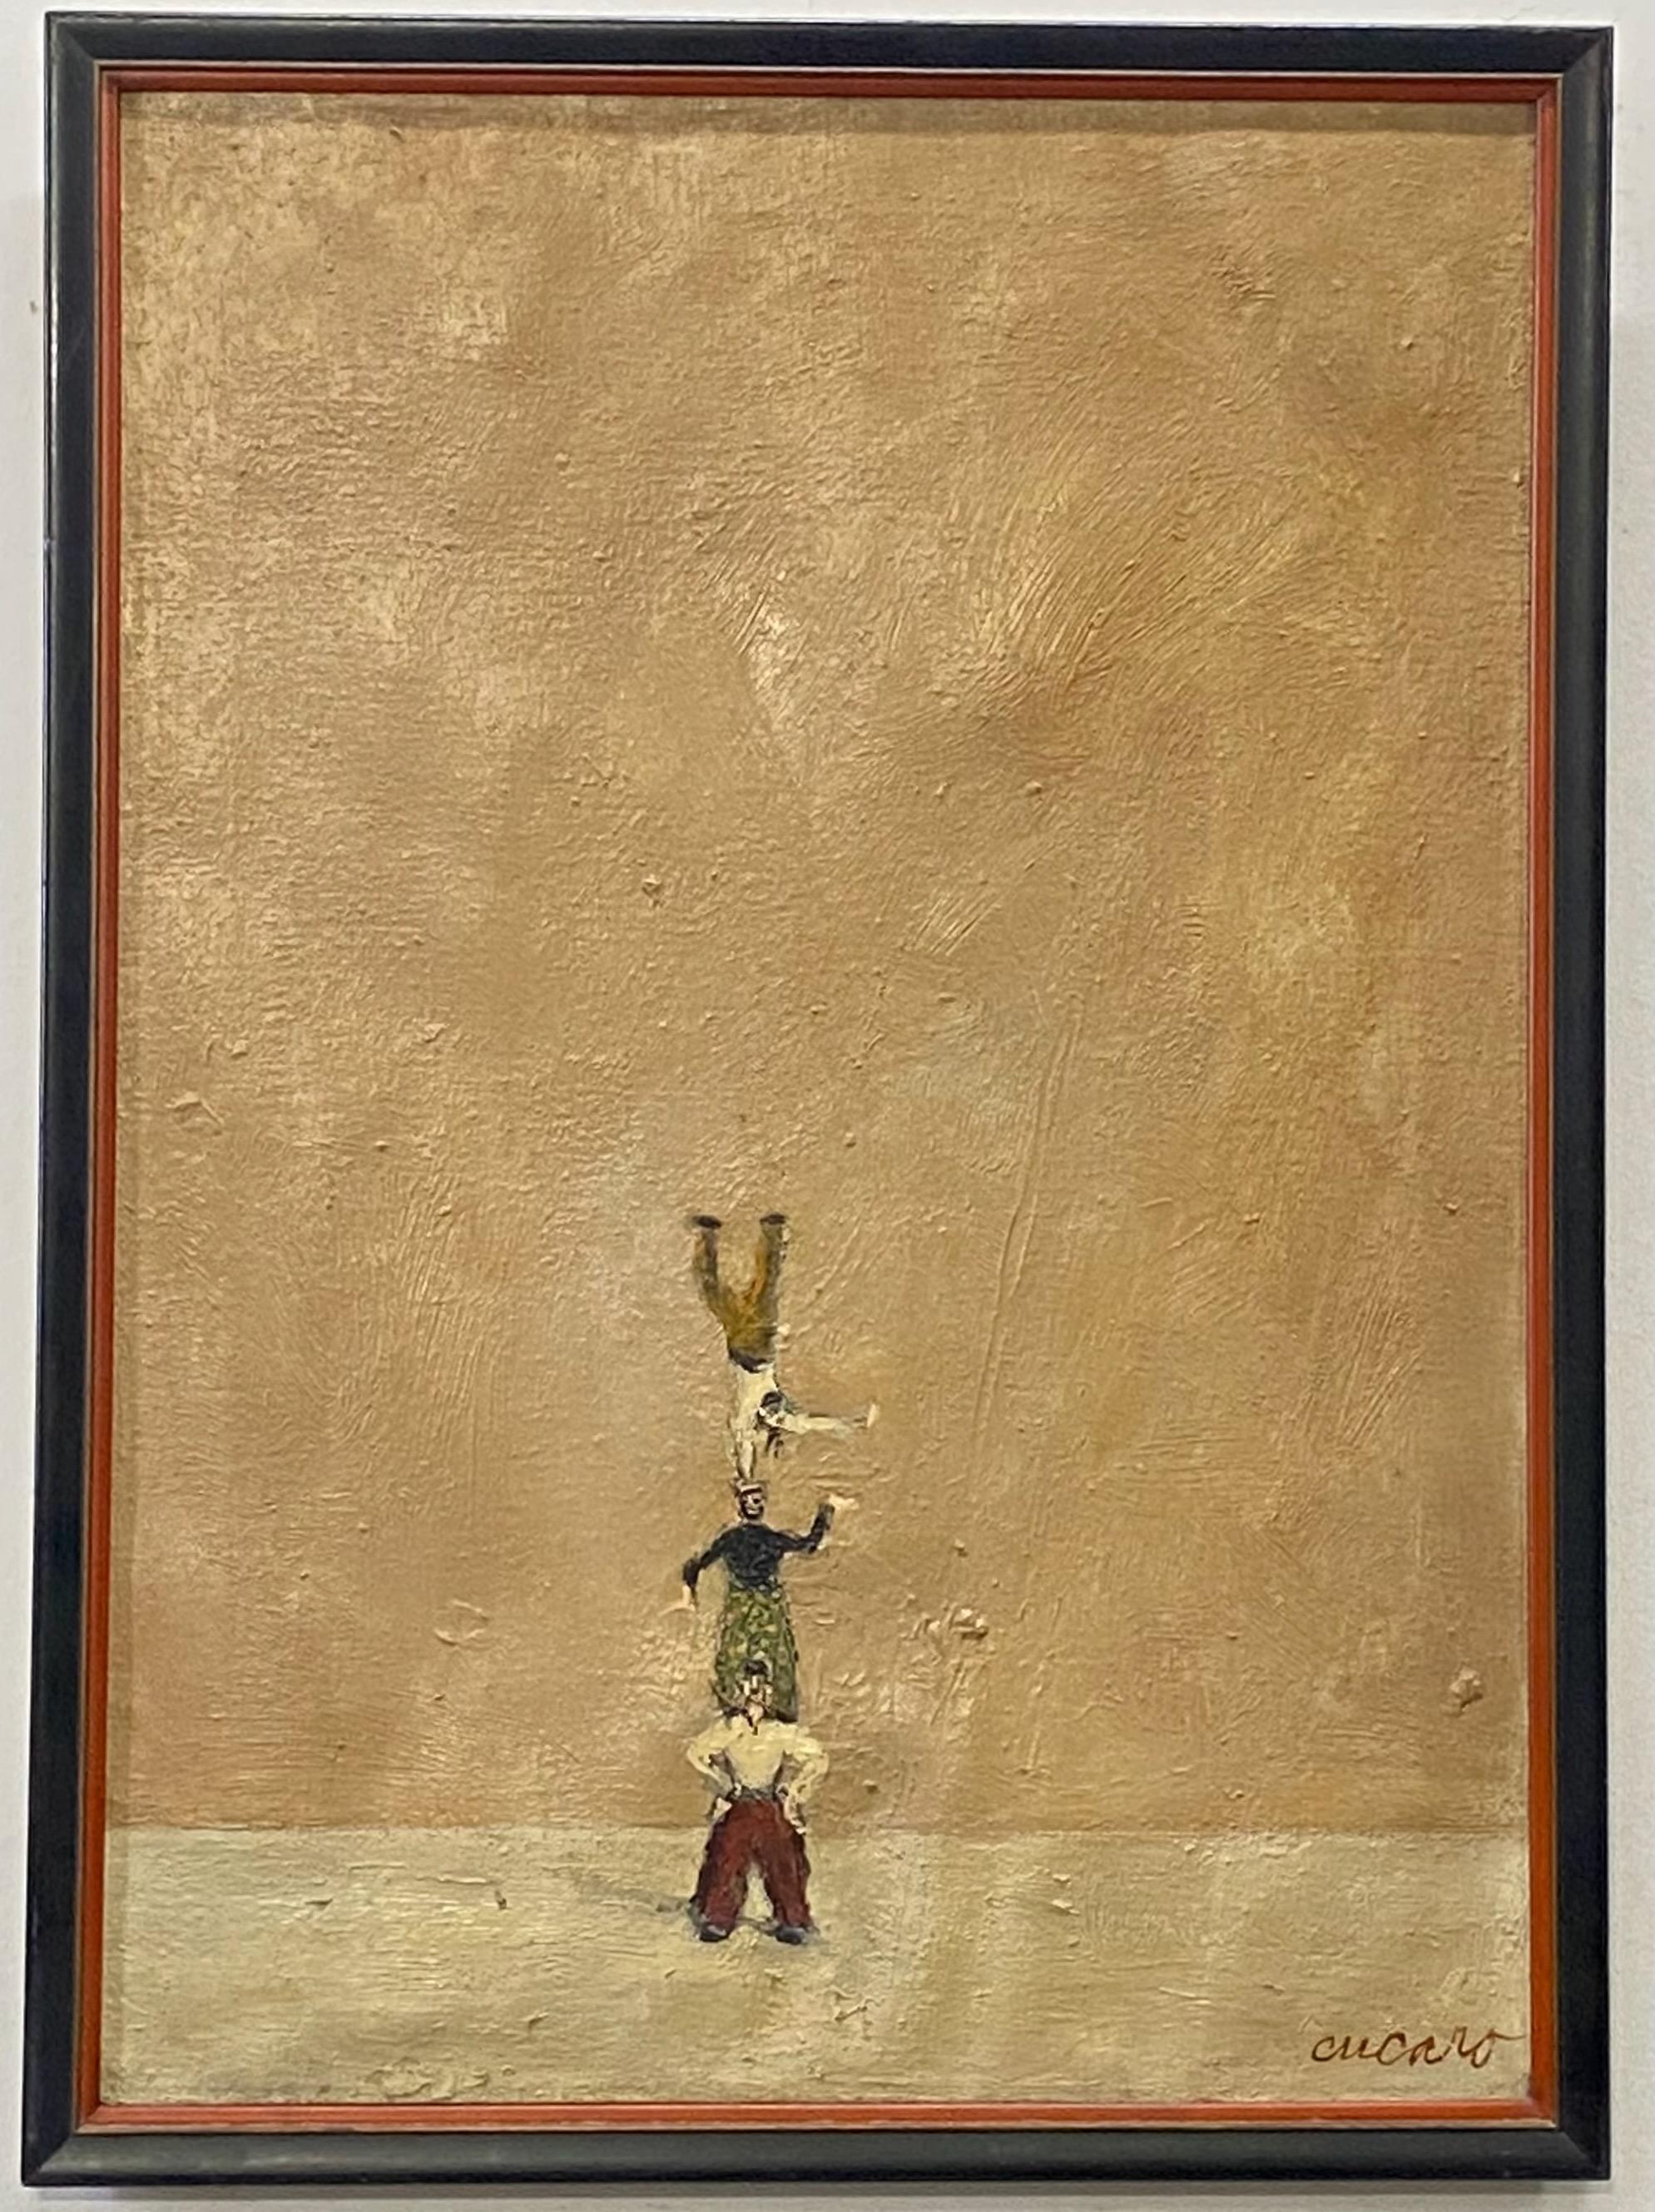 Charming expressionist style painting of circus acrobat performers by California San Francisco artist Pascal “Pat” Cucaro (b. 1915–2004).
Framed oil on canvas. Mid 20th century 1950's-1960's.

Cucaro was active in San Franciso’s highly influential